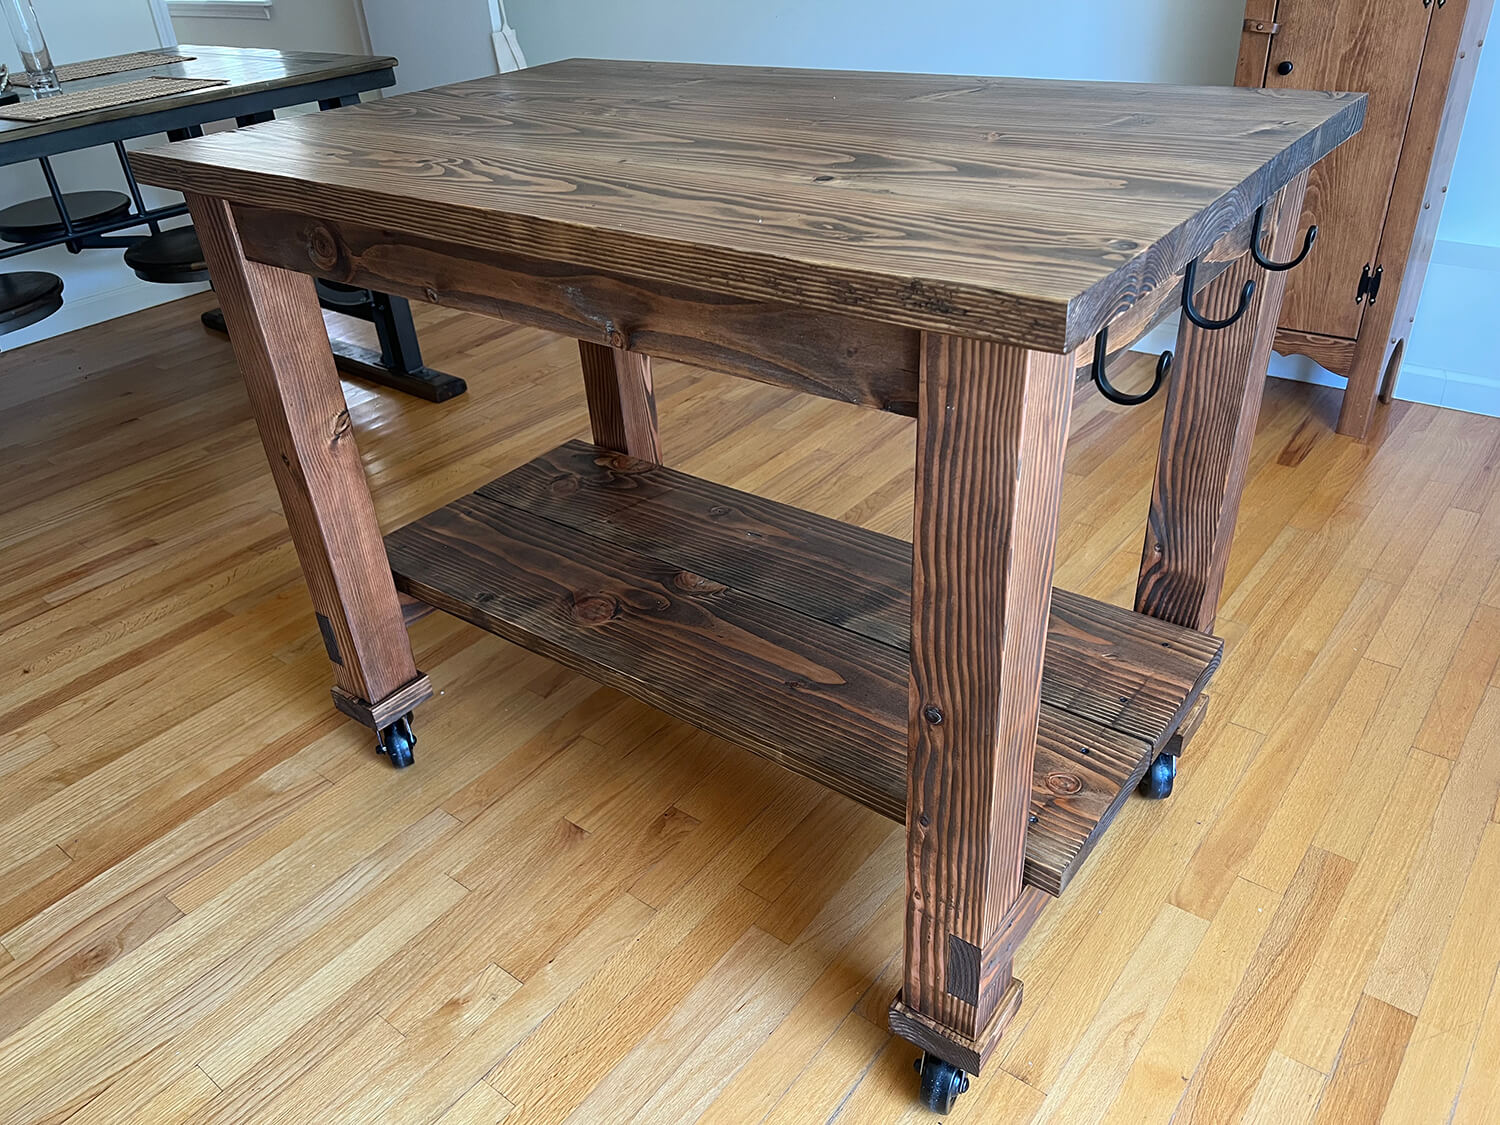 Unique reclaimed wood kitchen island by Urban Garden Studio, adding rustic charm to your kitchen with its handcrafted design and eco-friendly materials.